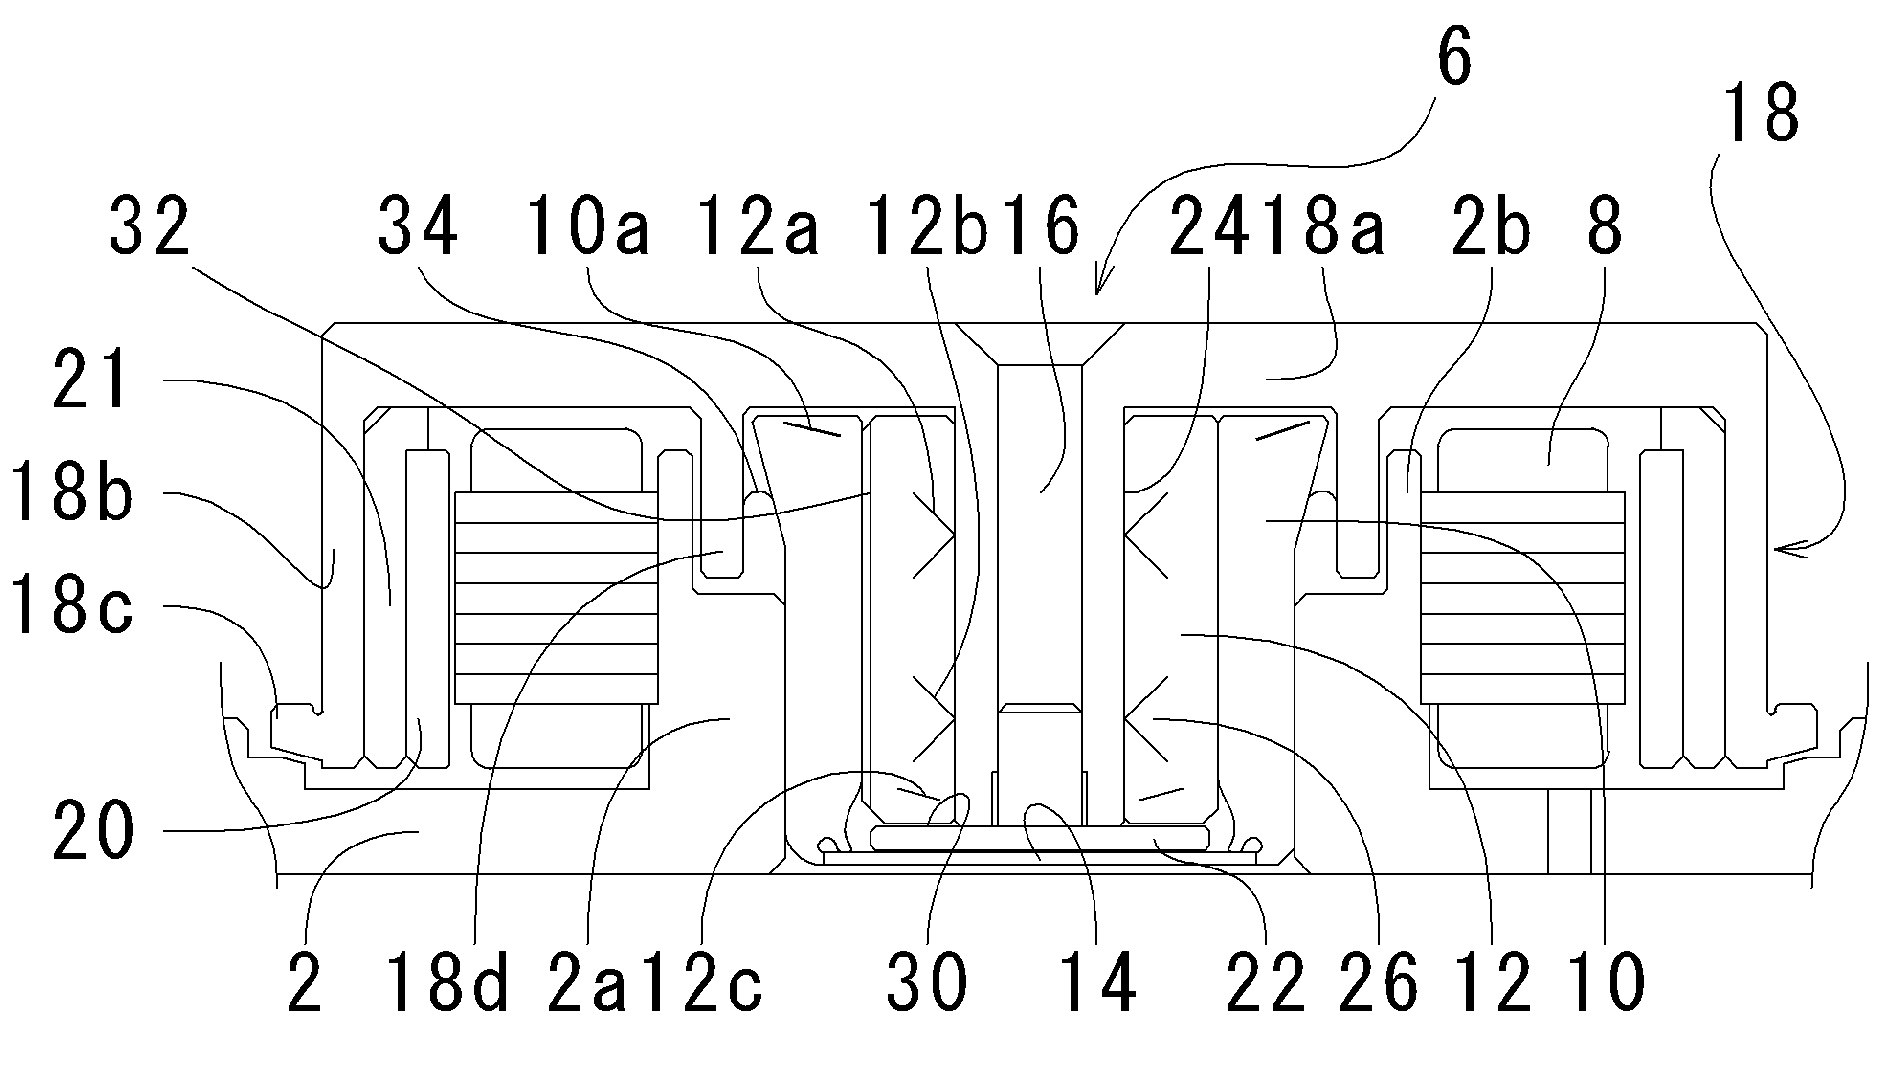 Fluid-dynamic-pressure bearing, spindle motor furnished with the fluid-dynamic-pressure bearing, method of manufacturing rotor assembly applied in the spindle motor, and recording-disk drive furnished with the spindle motor